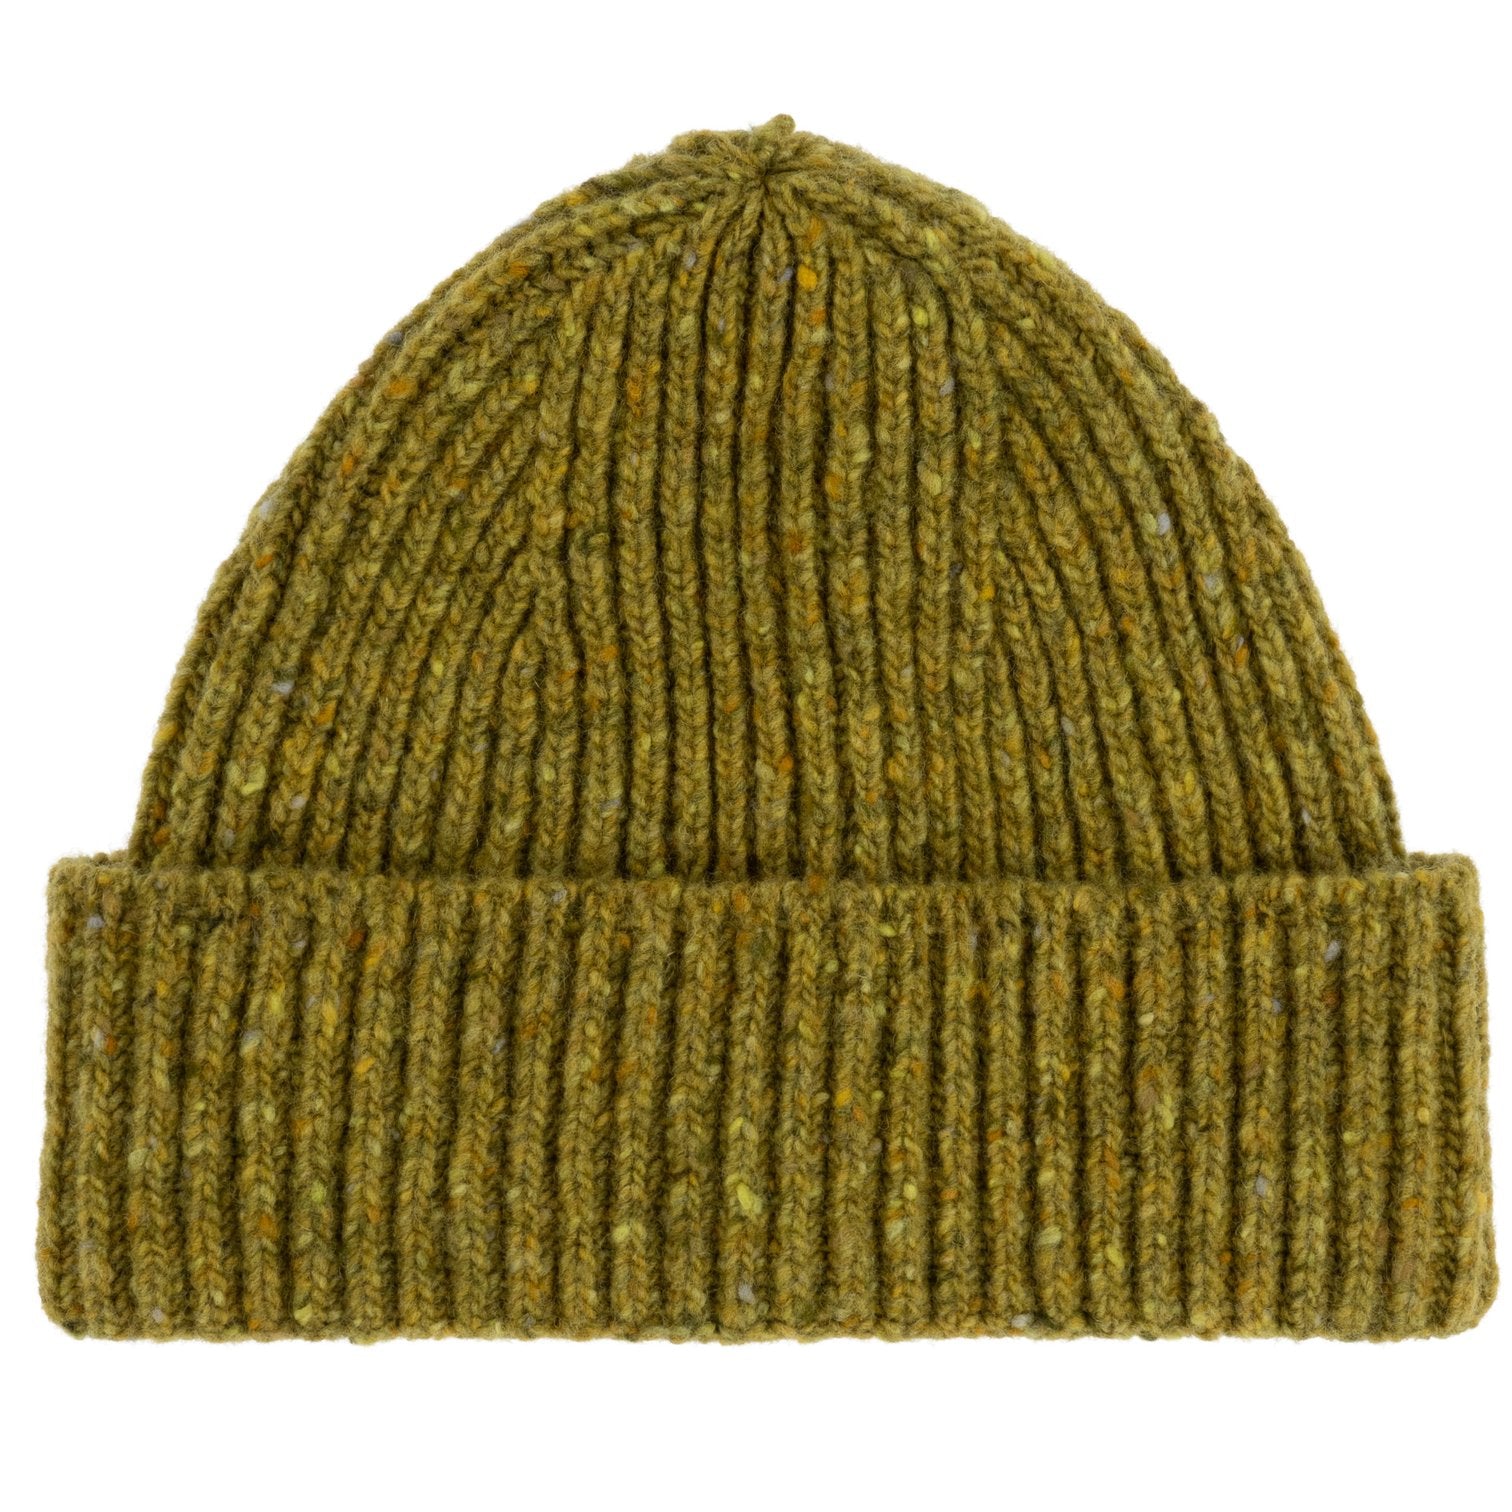 Carrier Company Donegal Wool Hat in Pistacchio